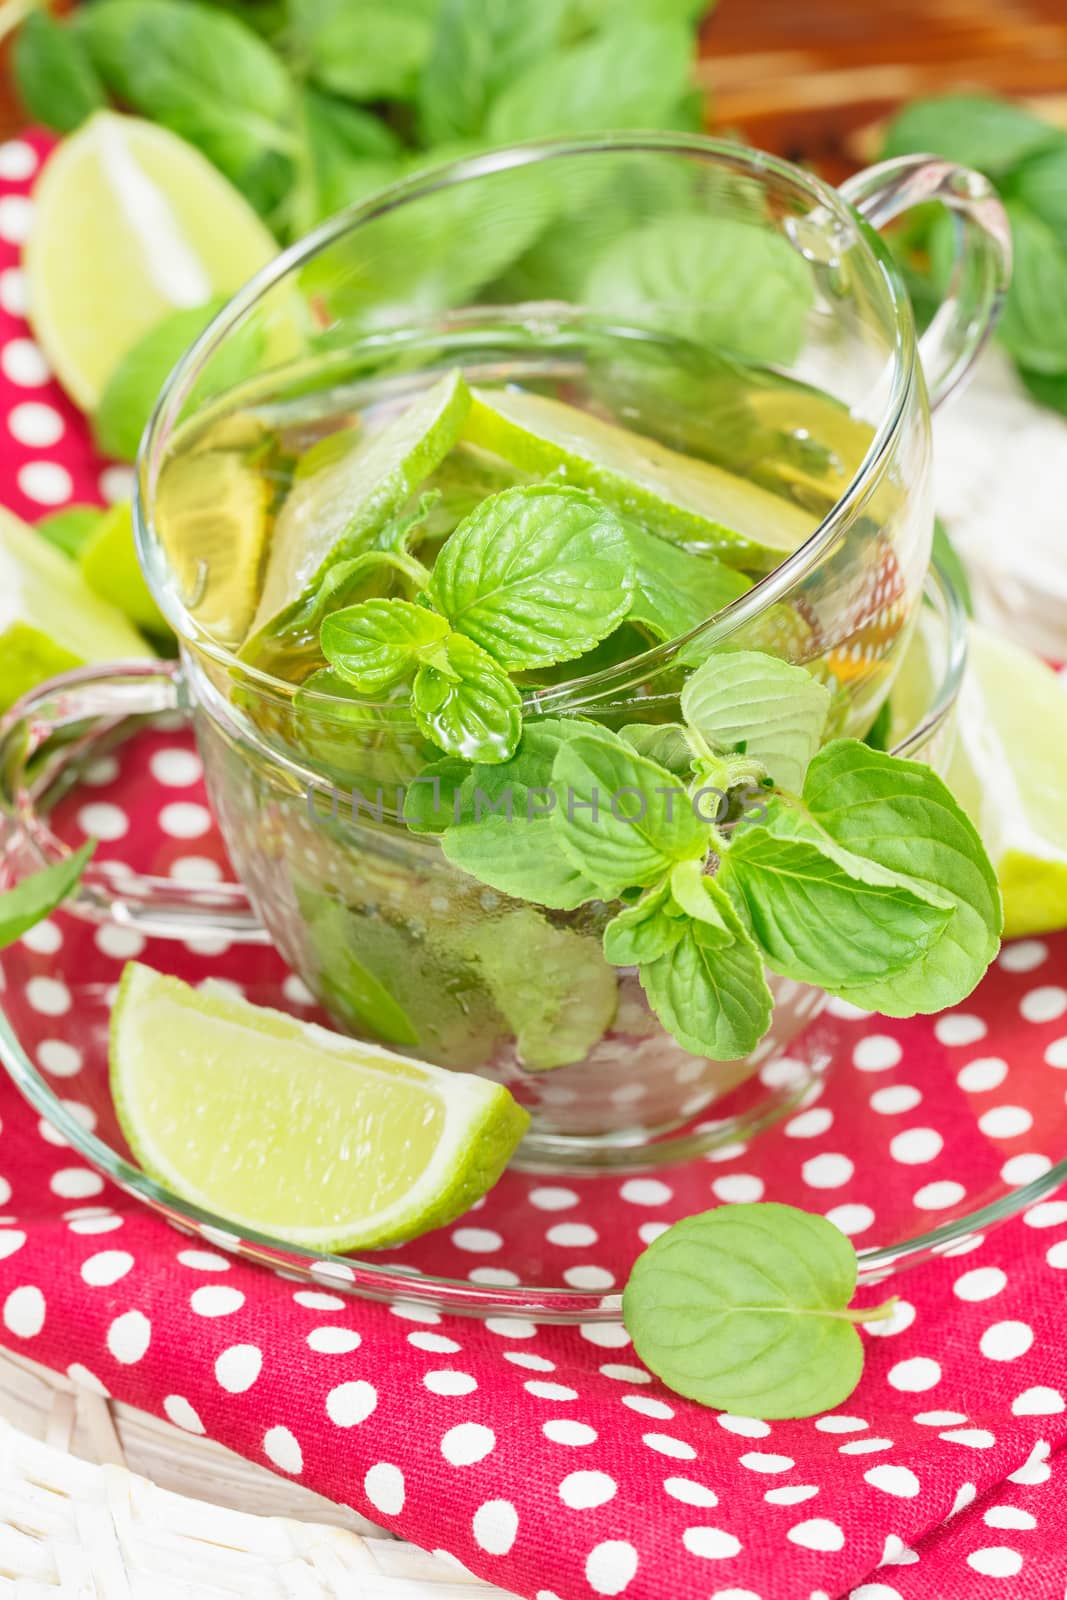 Mint and lime iced green tea by Slast20